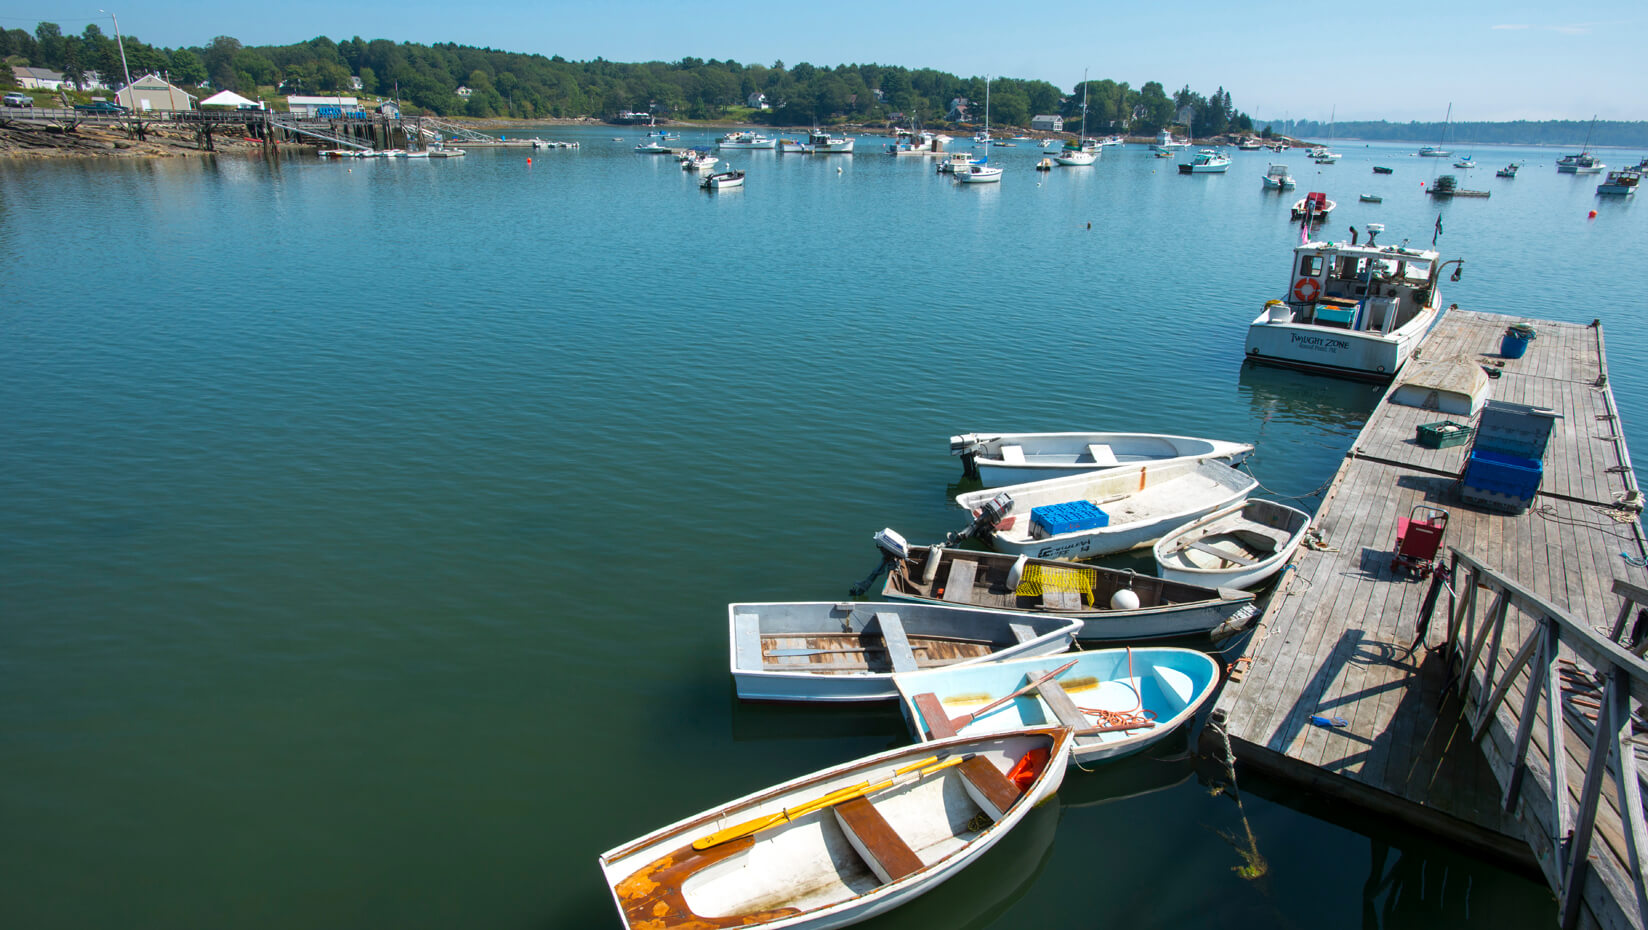 Boats of a dock on the coast of Maine